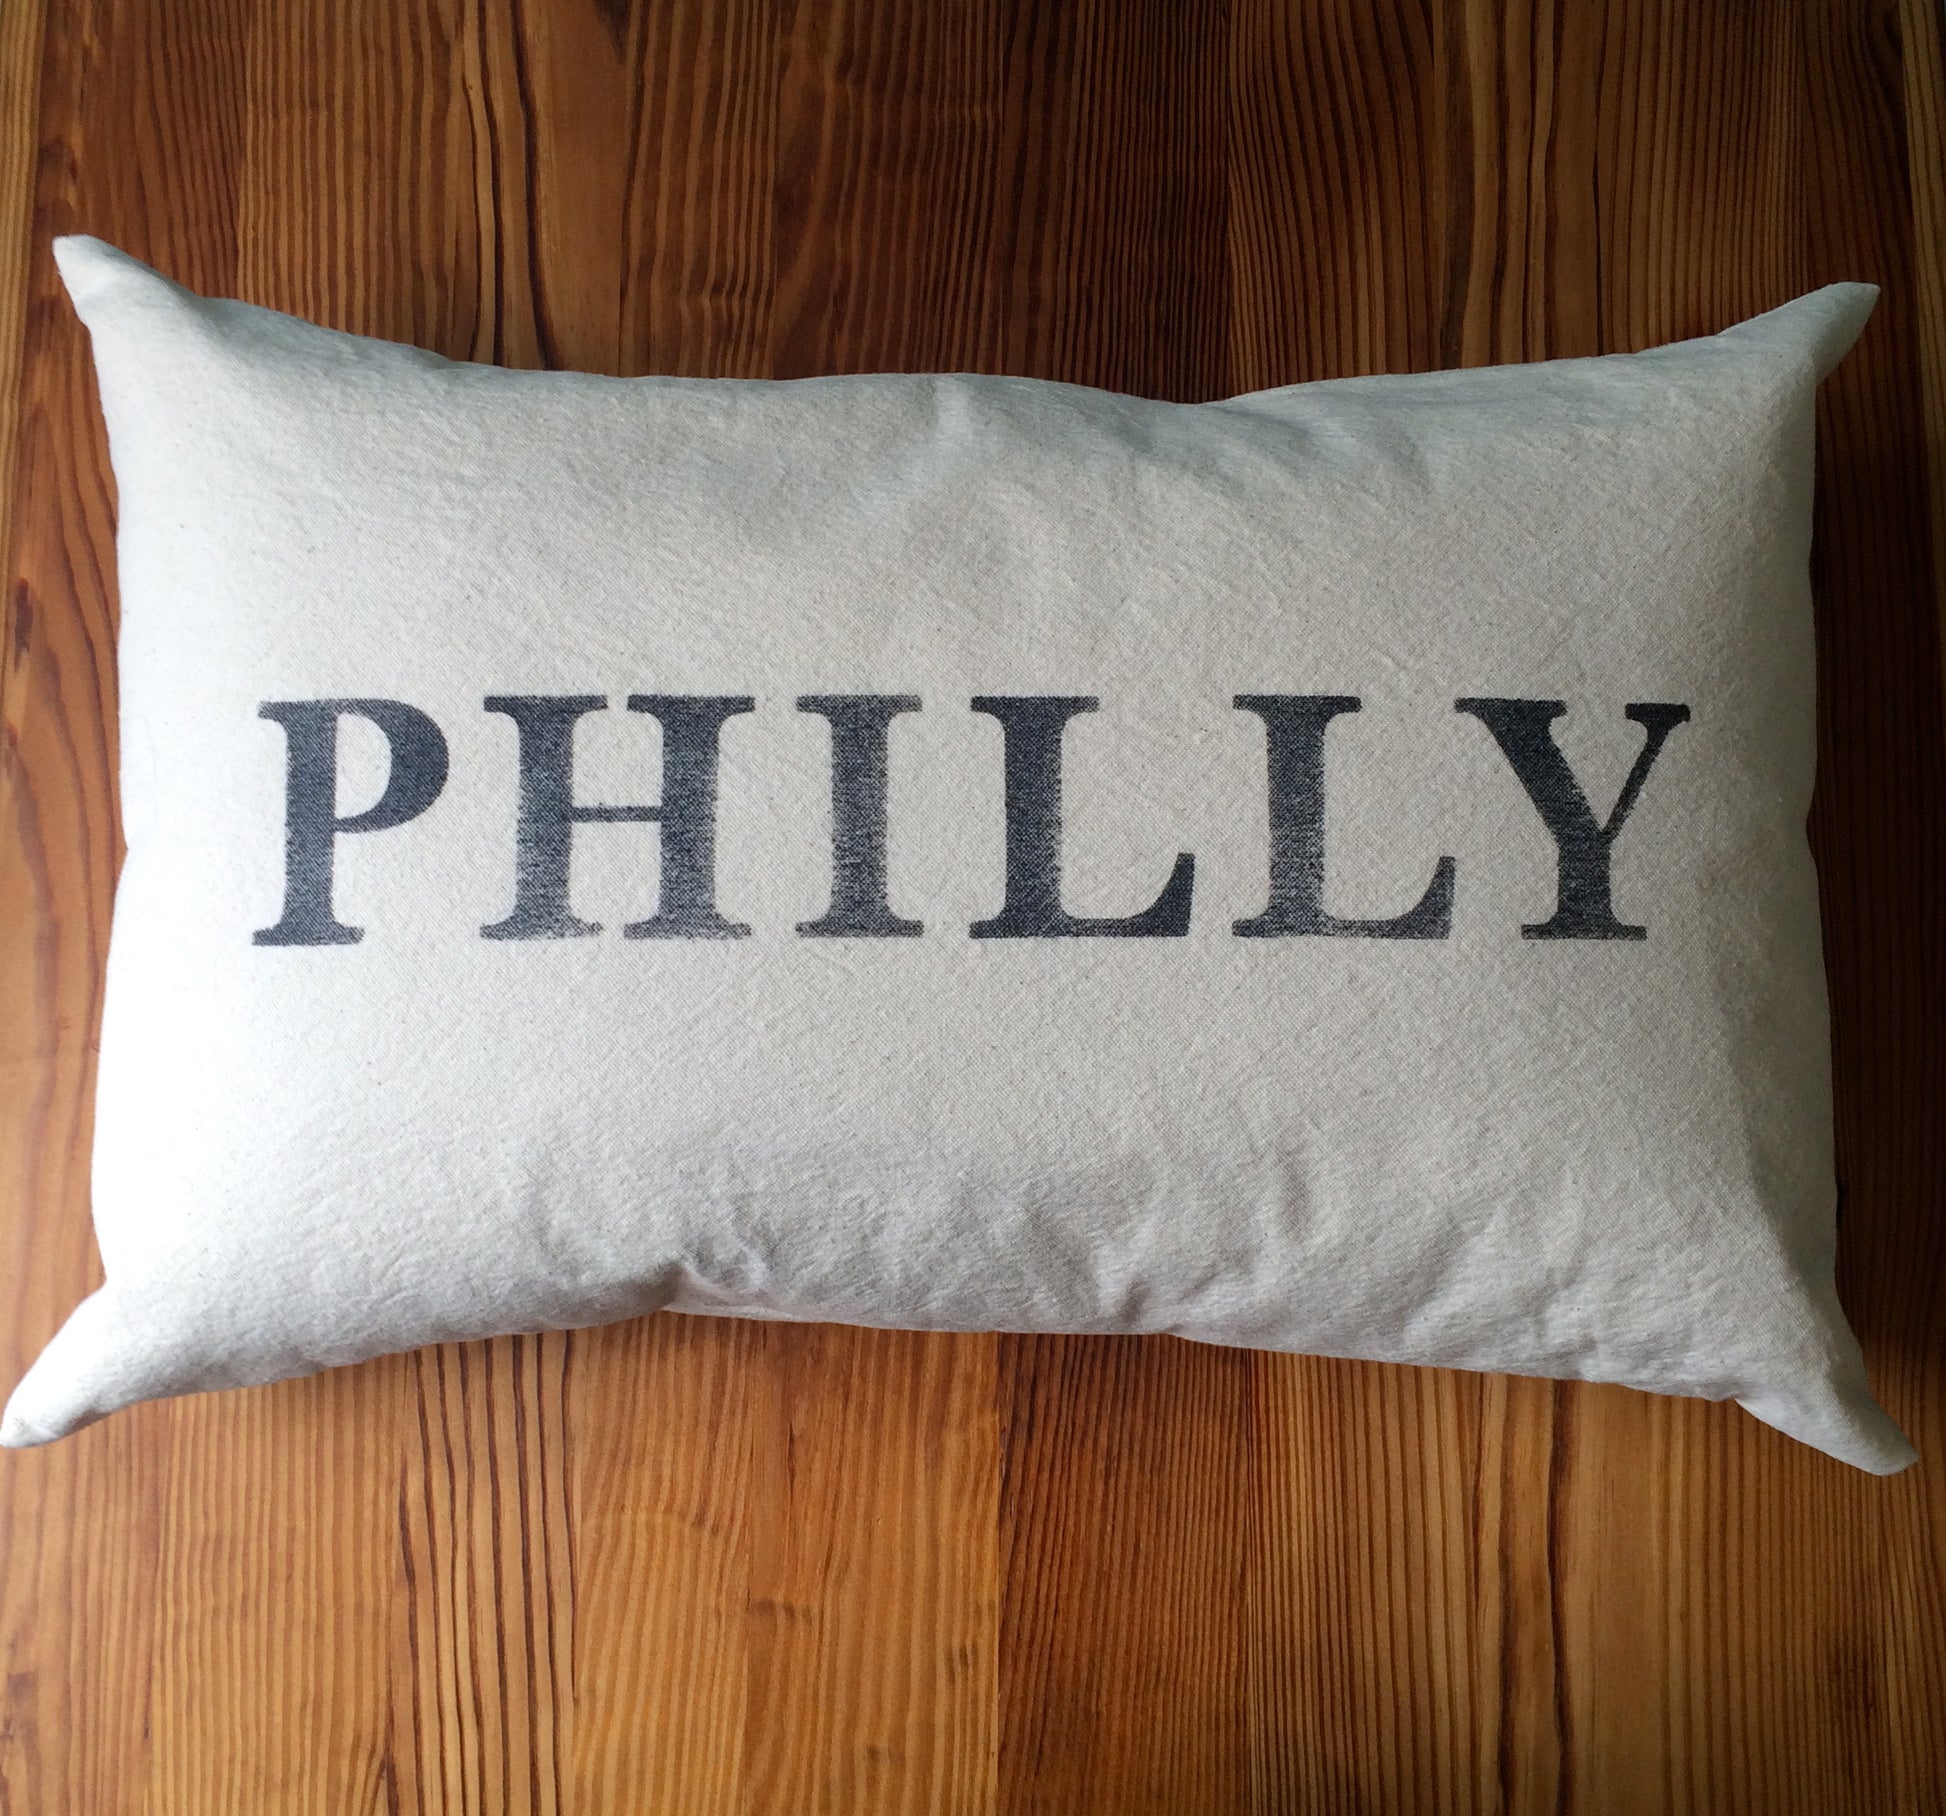 Rectangular unbleached cotton Philly Pillows with the word "PHILLY" printed in bold, black letters, set against a wooden background from The Pillow Works.